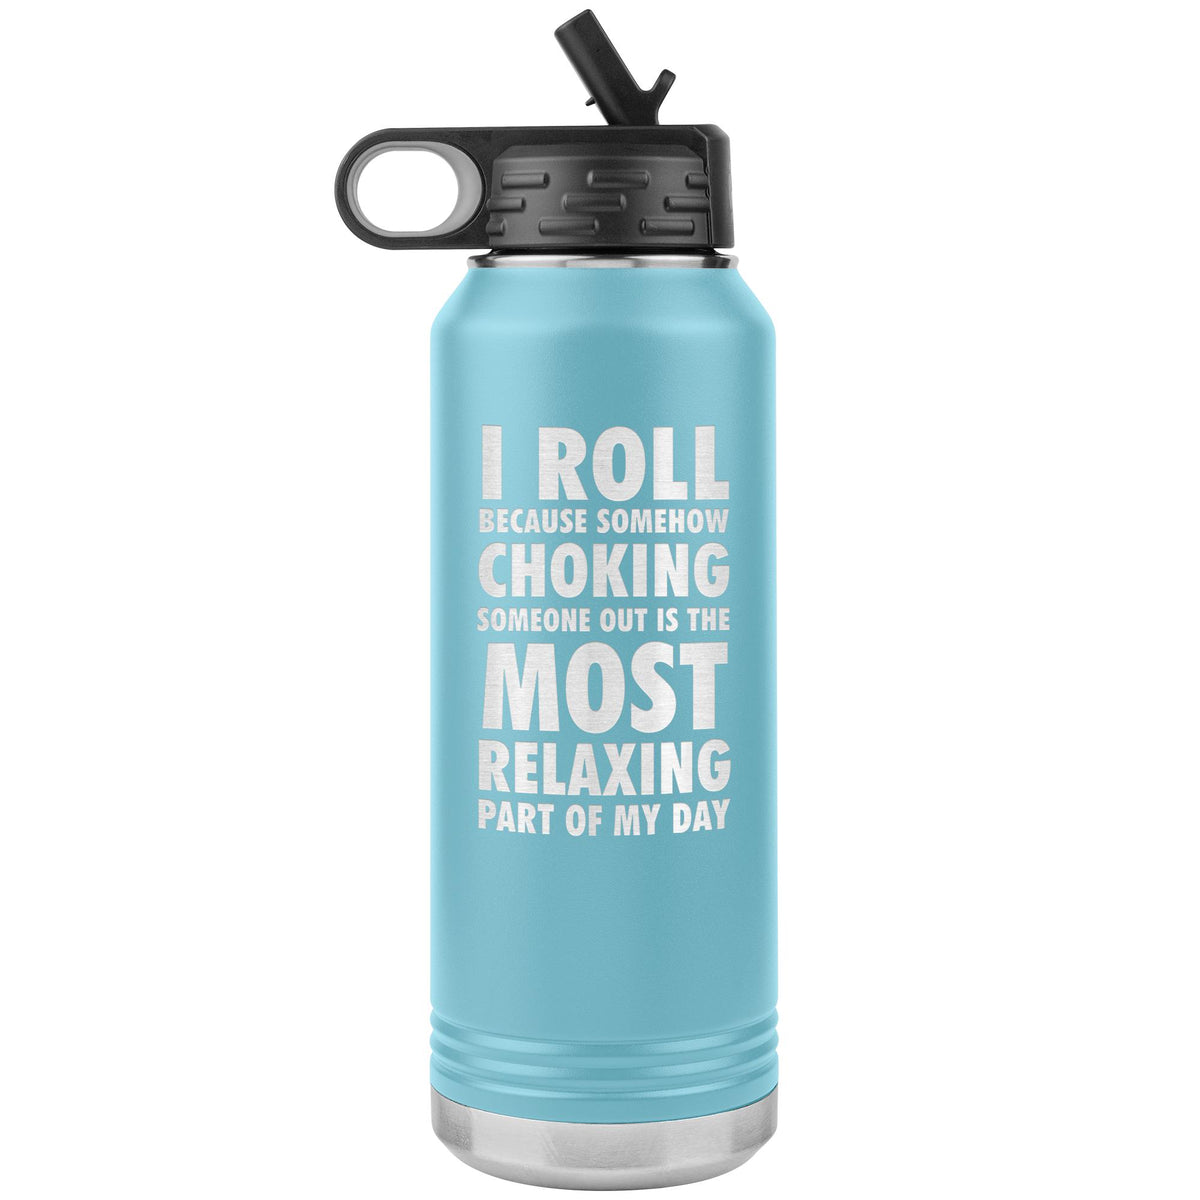 I roll because somehow choking someone out is the most relaxing part of my day Water Bottle Tumbler 32 oz-Jiu Jitsu Legacy | BJJ Store